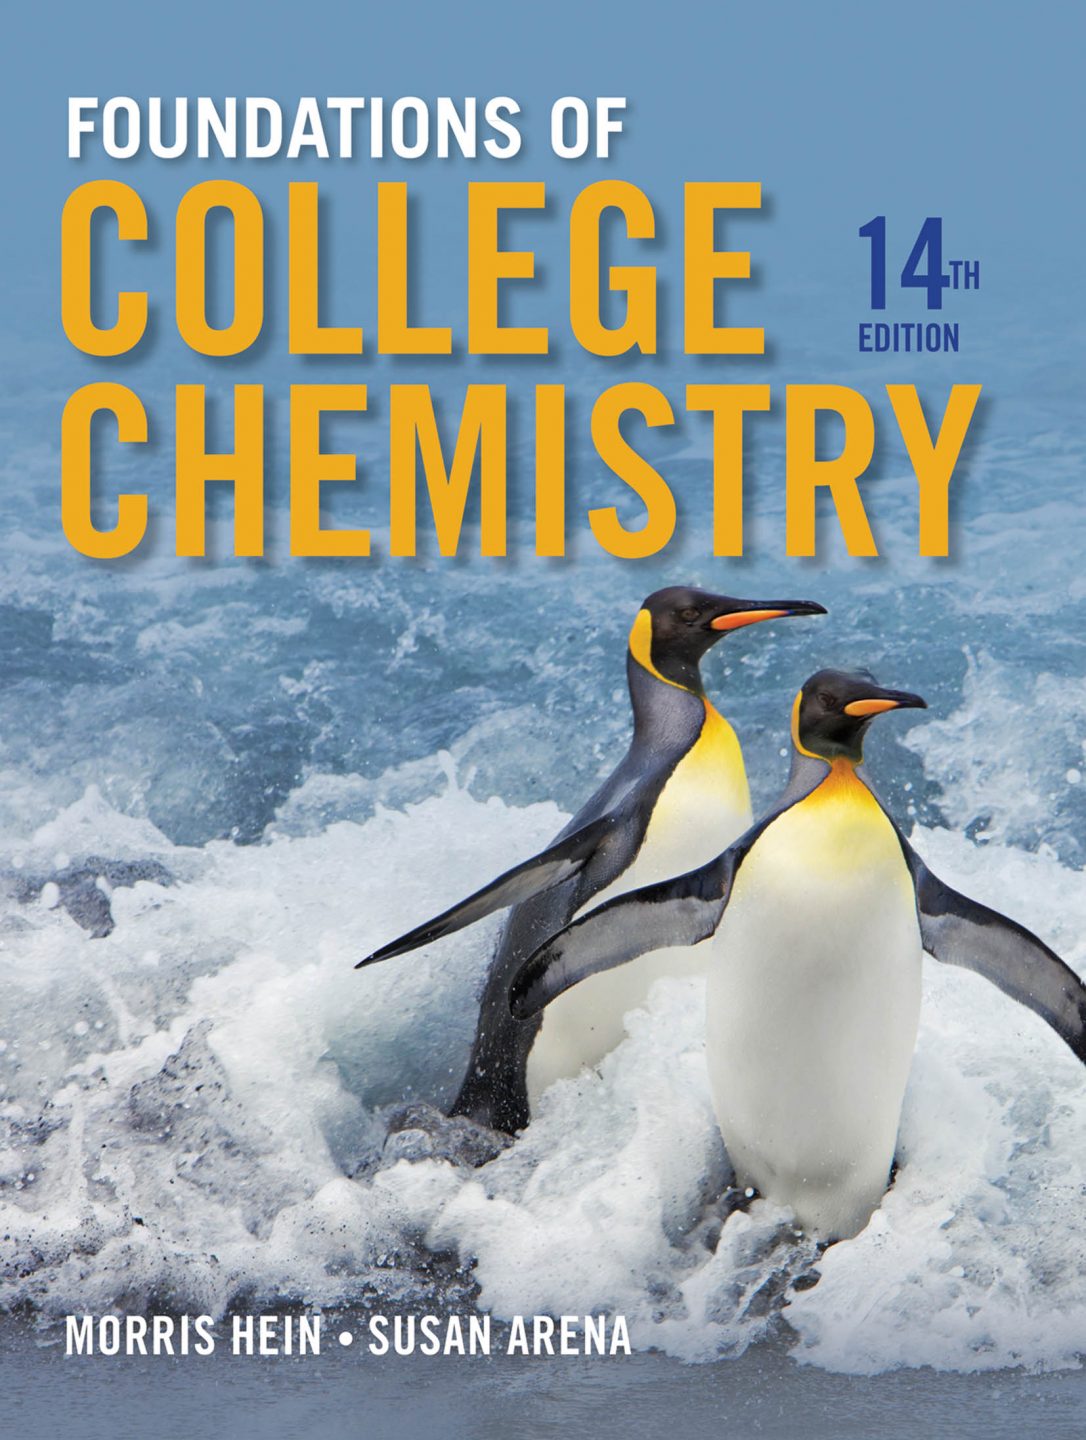 Foundations of College Chemistry  Morris Hein PDF